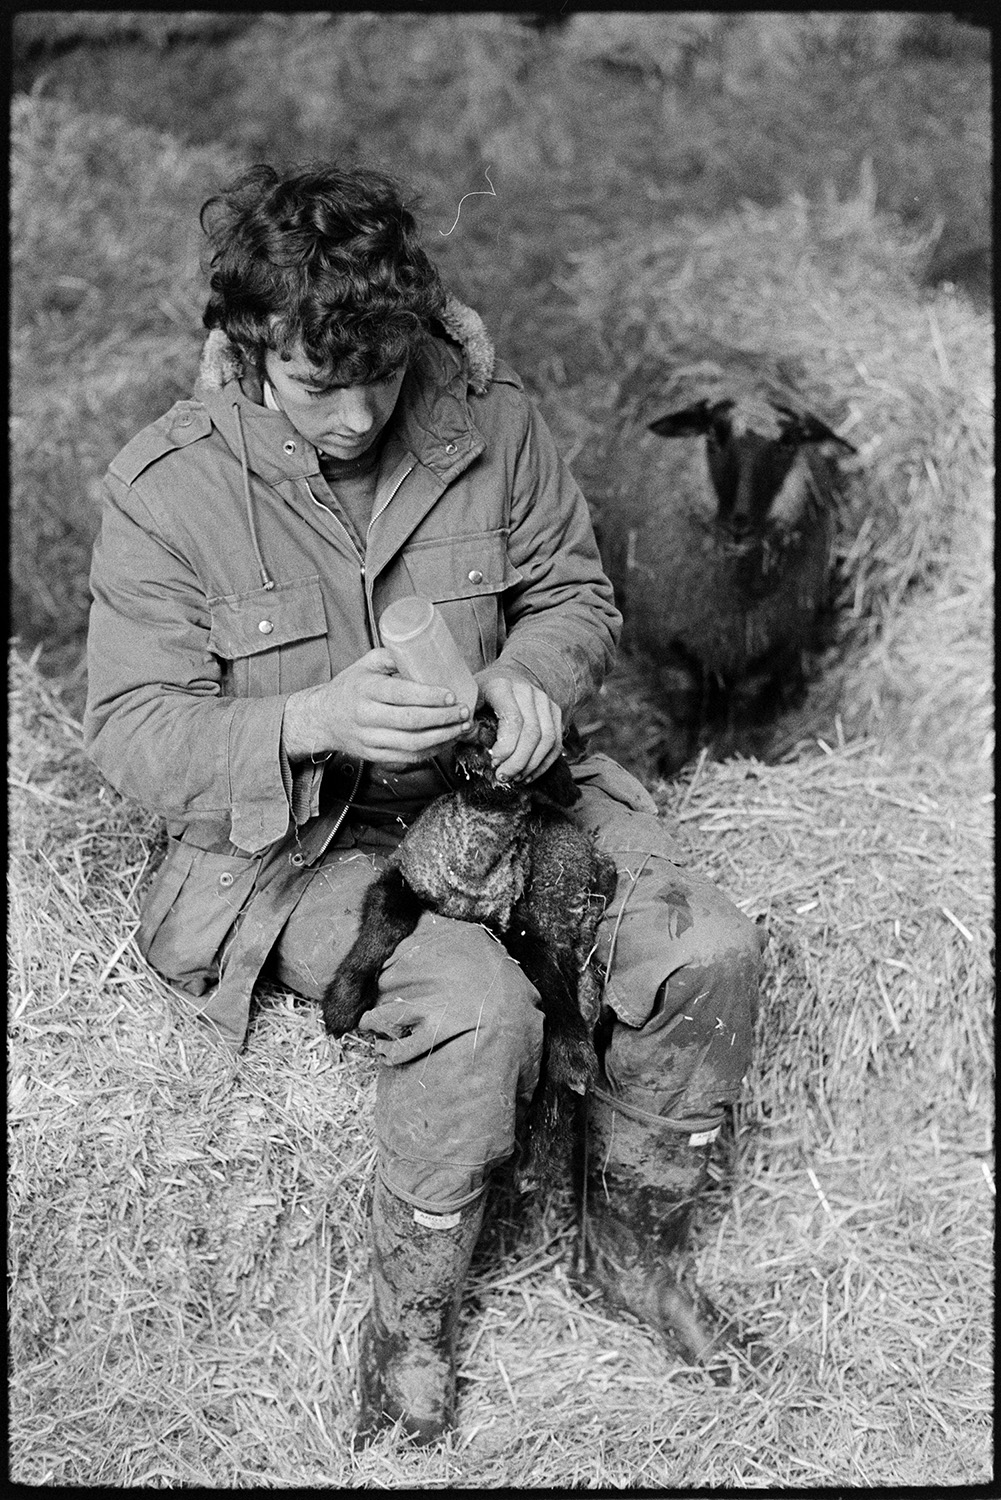 Farmer feeding lambs with milk in field and barn. 
[Graham Ward sat on a hay bale and bottle feeding a lamb in a barn at Parsonage, Iddesleigh. A ewe is looking on in the background.]